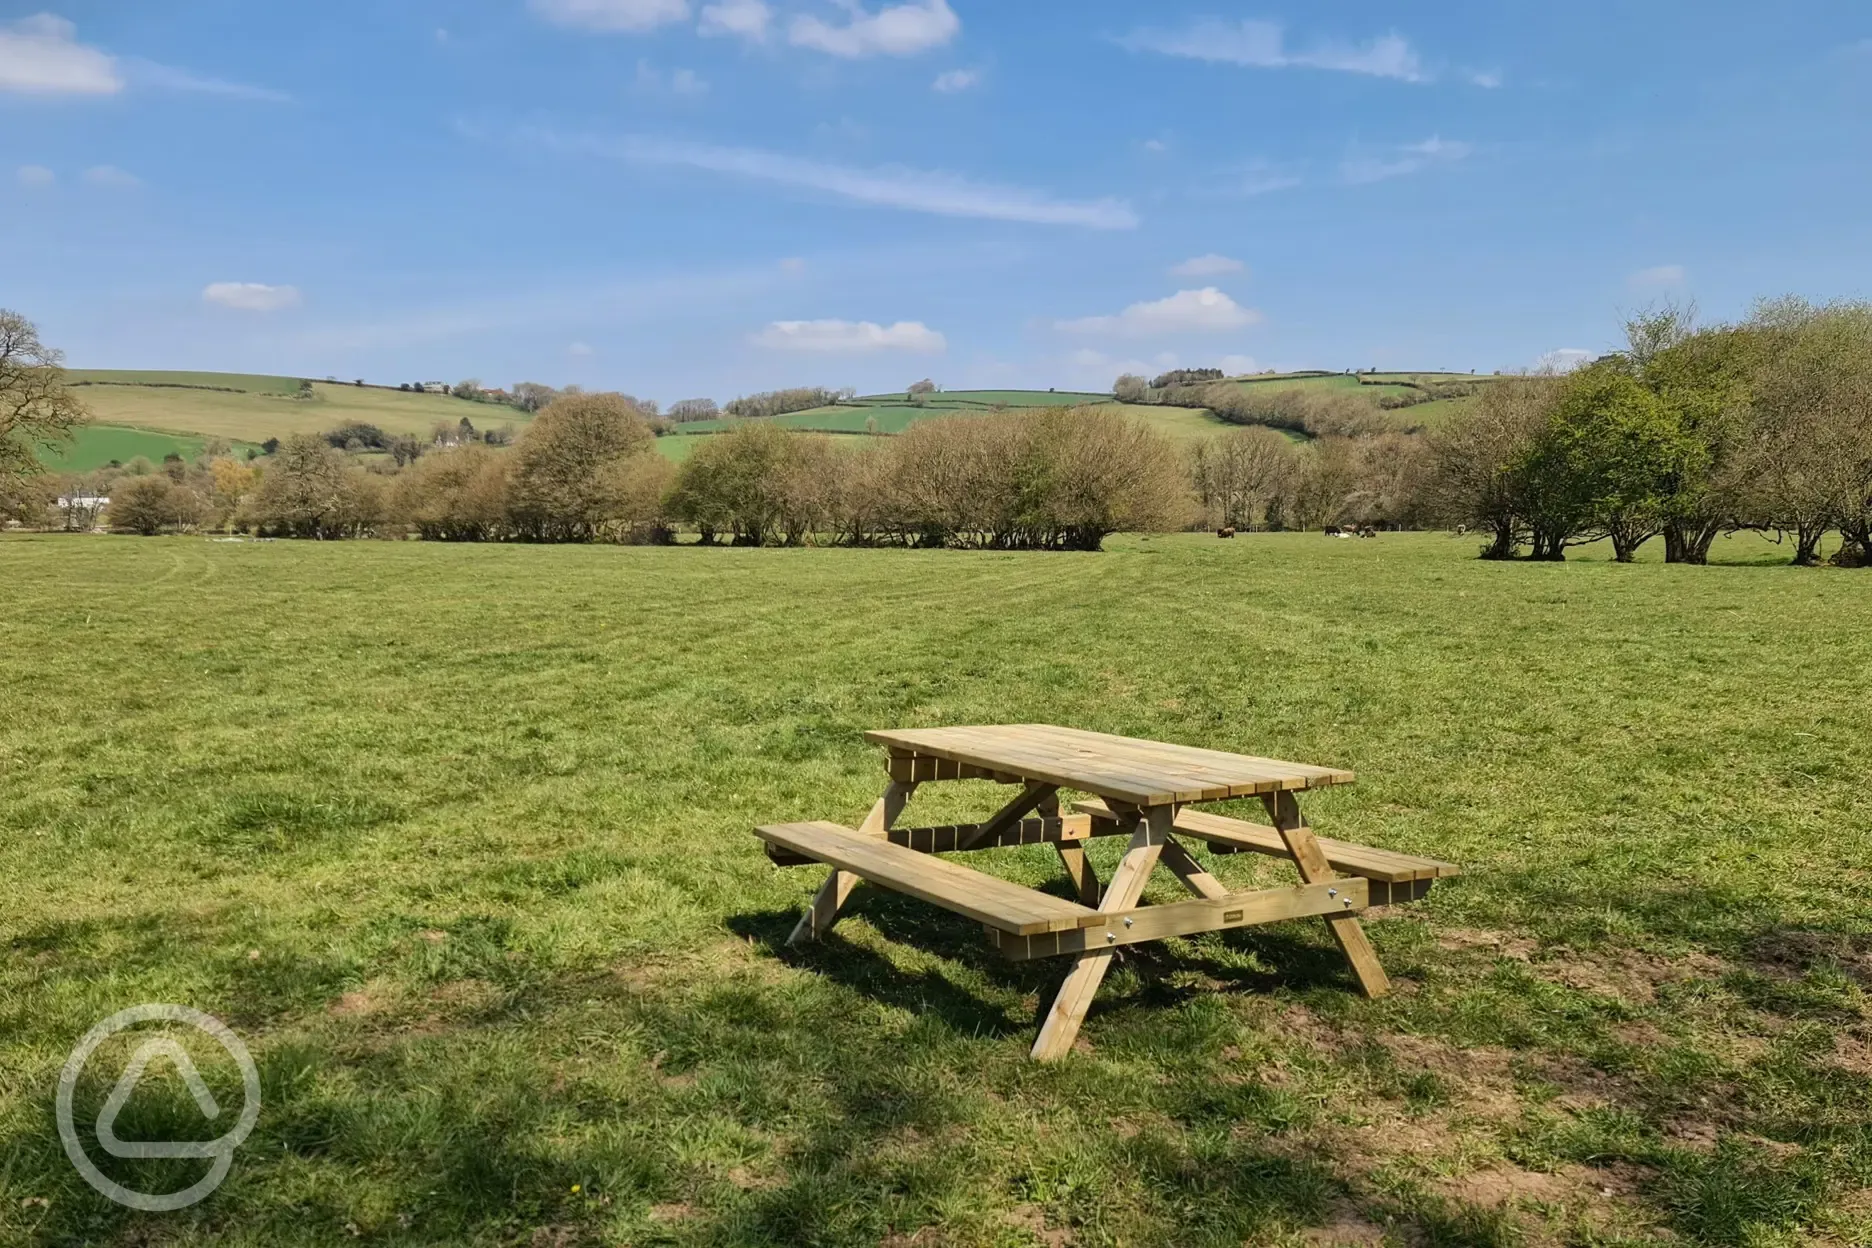 Picnic areas around the River and Meadows